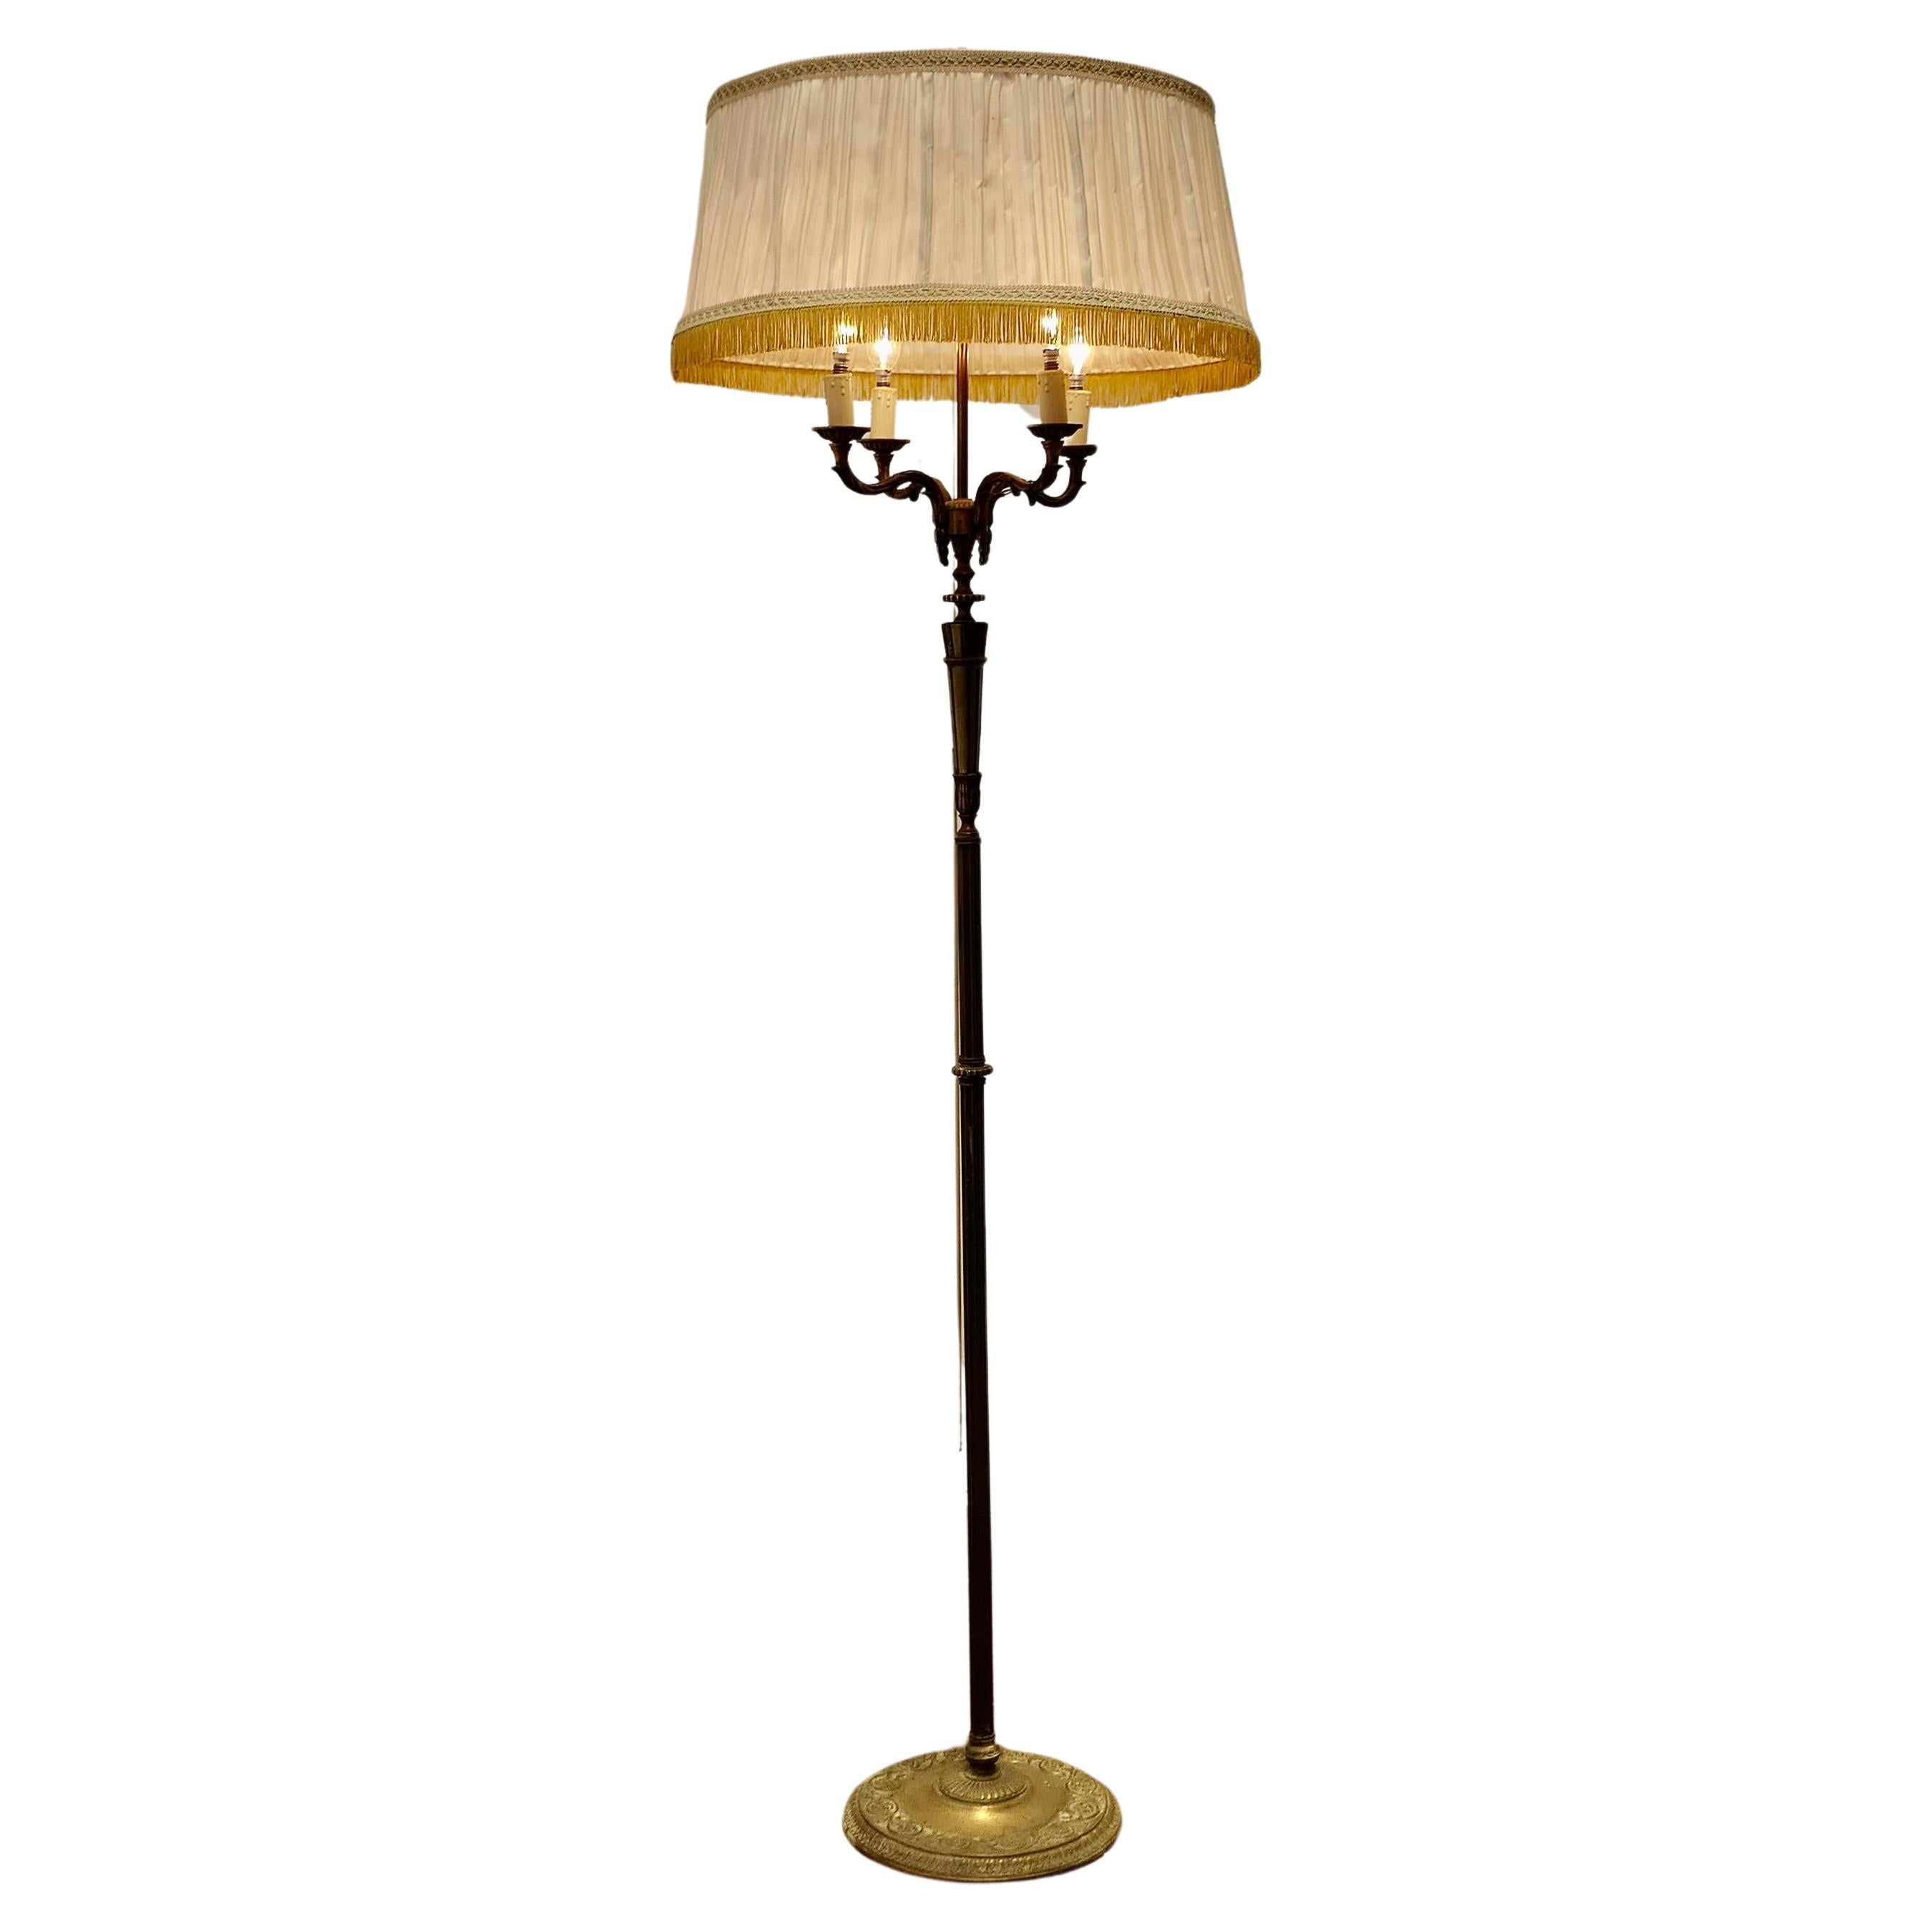 Rococo Gilt Brass Candelabra 4 Branch Floor Lamp, Standard Lamp  This is an elab For Sale